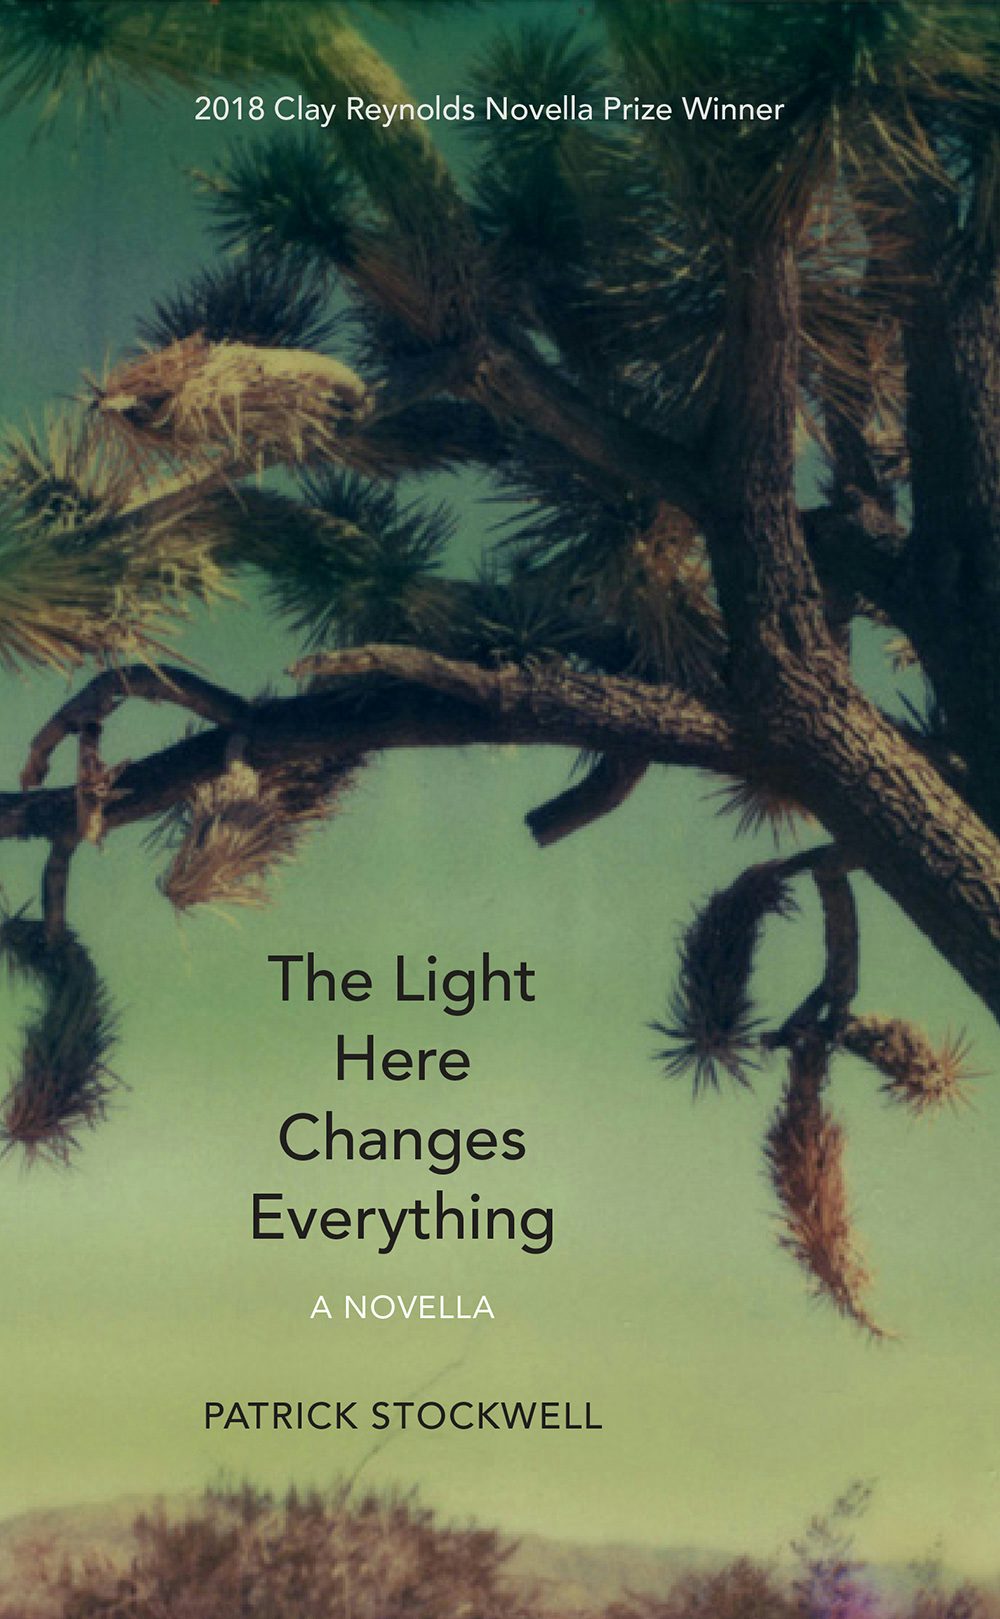 light changes everything by nancy e turner